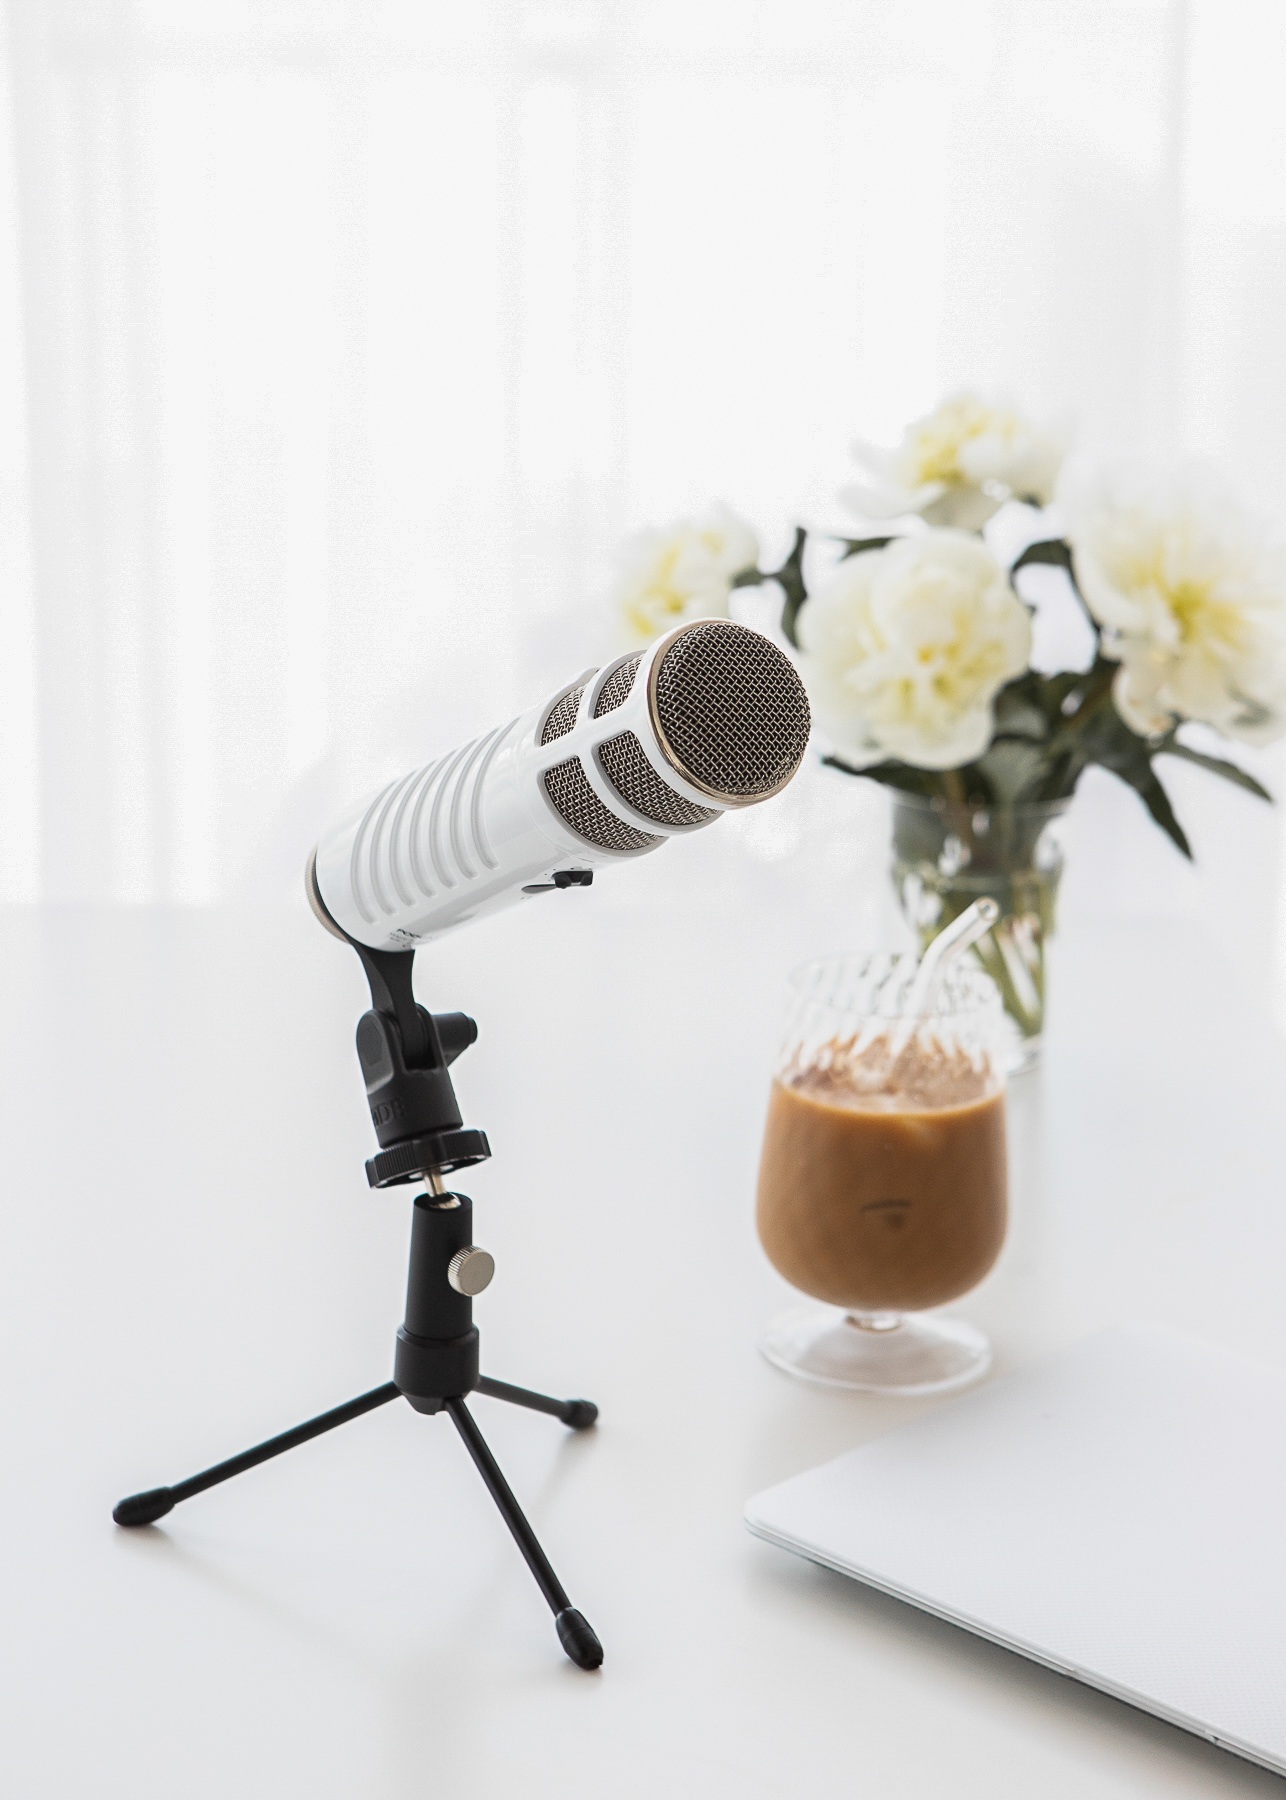 Why now is the best time to start a podcast